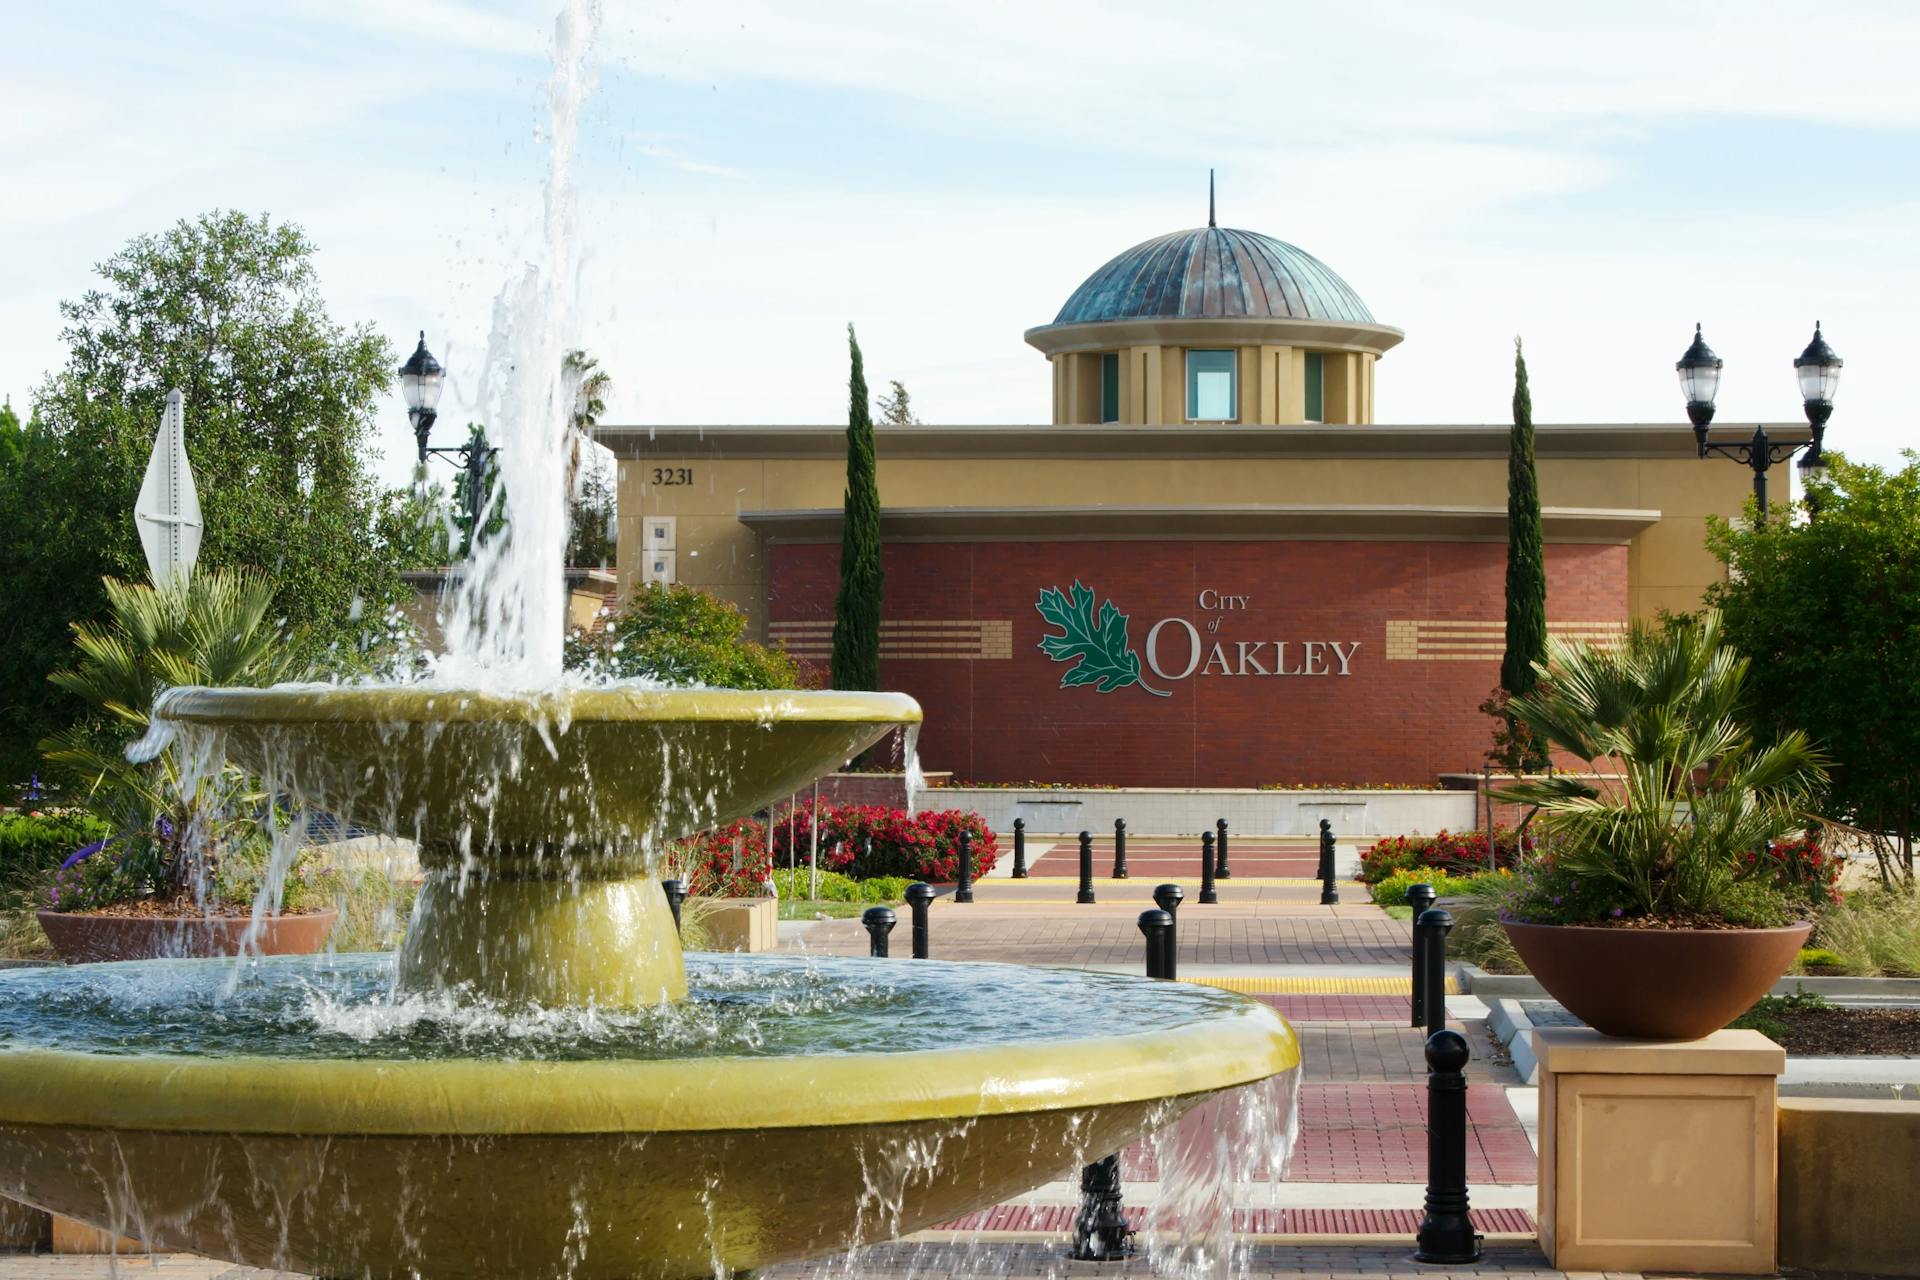 Image of the beautiful city of Oakley